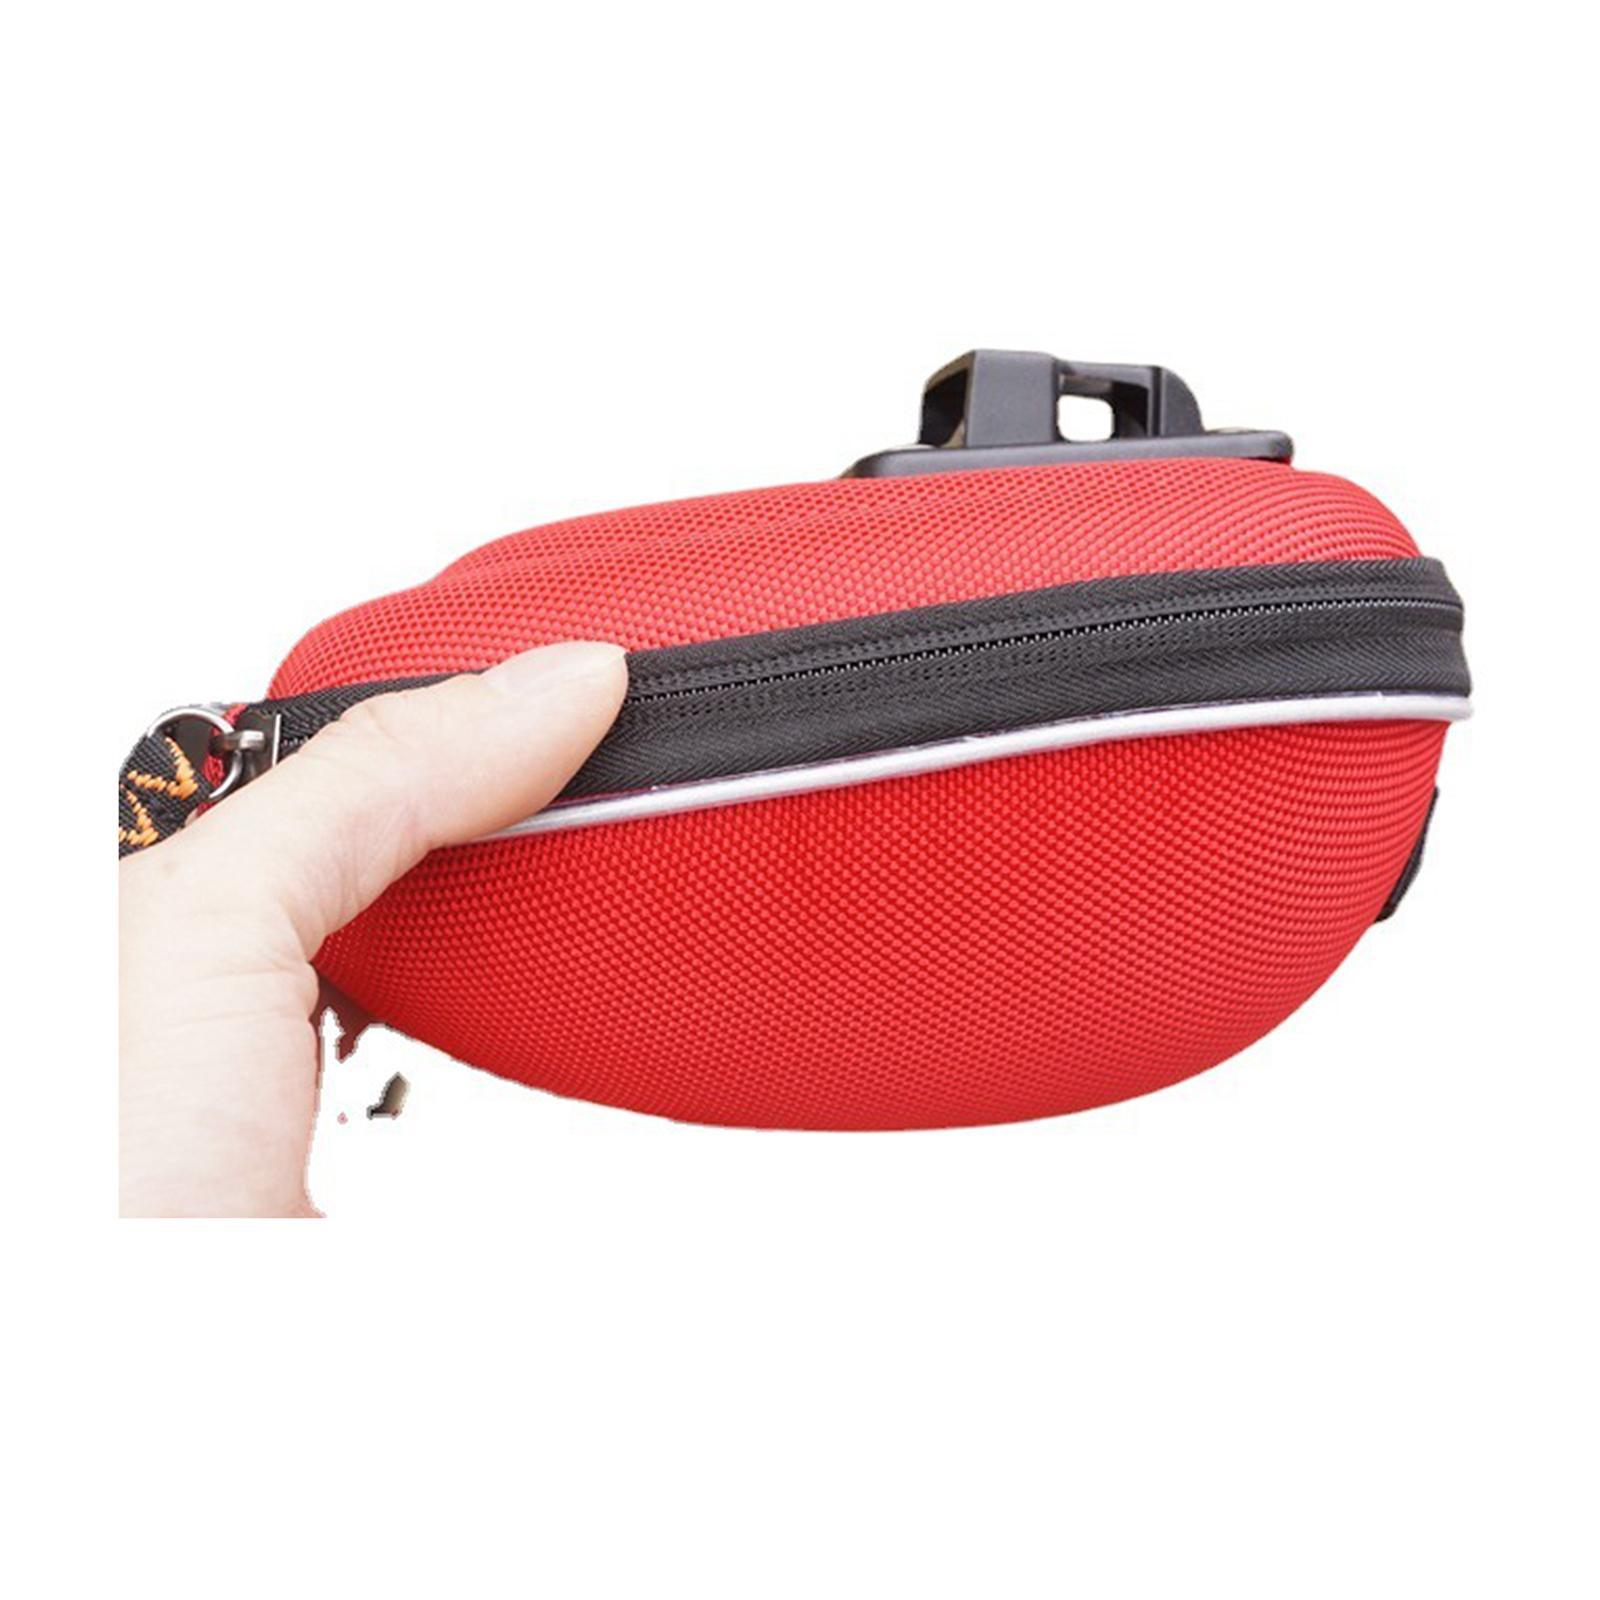 Bike Trunk Bag  Bag Pouch Luggage Trunk Bag Saddle Bag Rear Rack Bag Backseat Bag for Cycling Travel Touring  Accessories